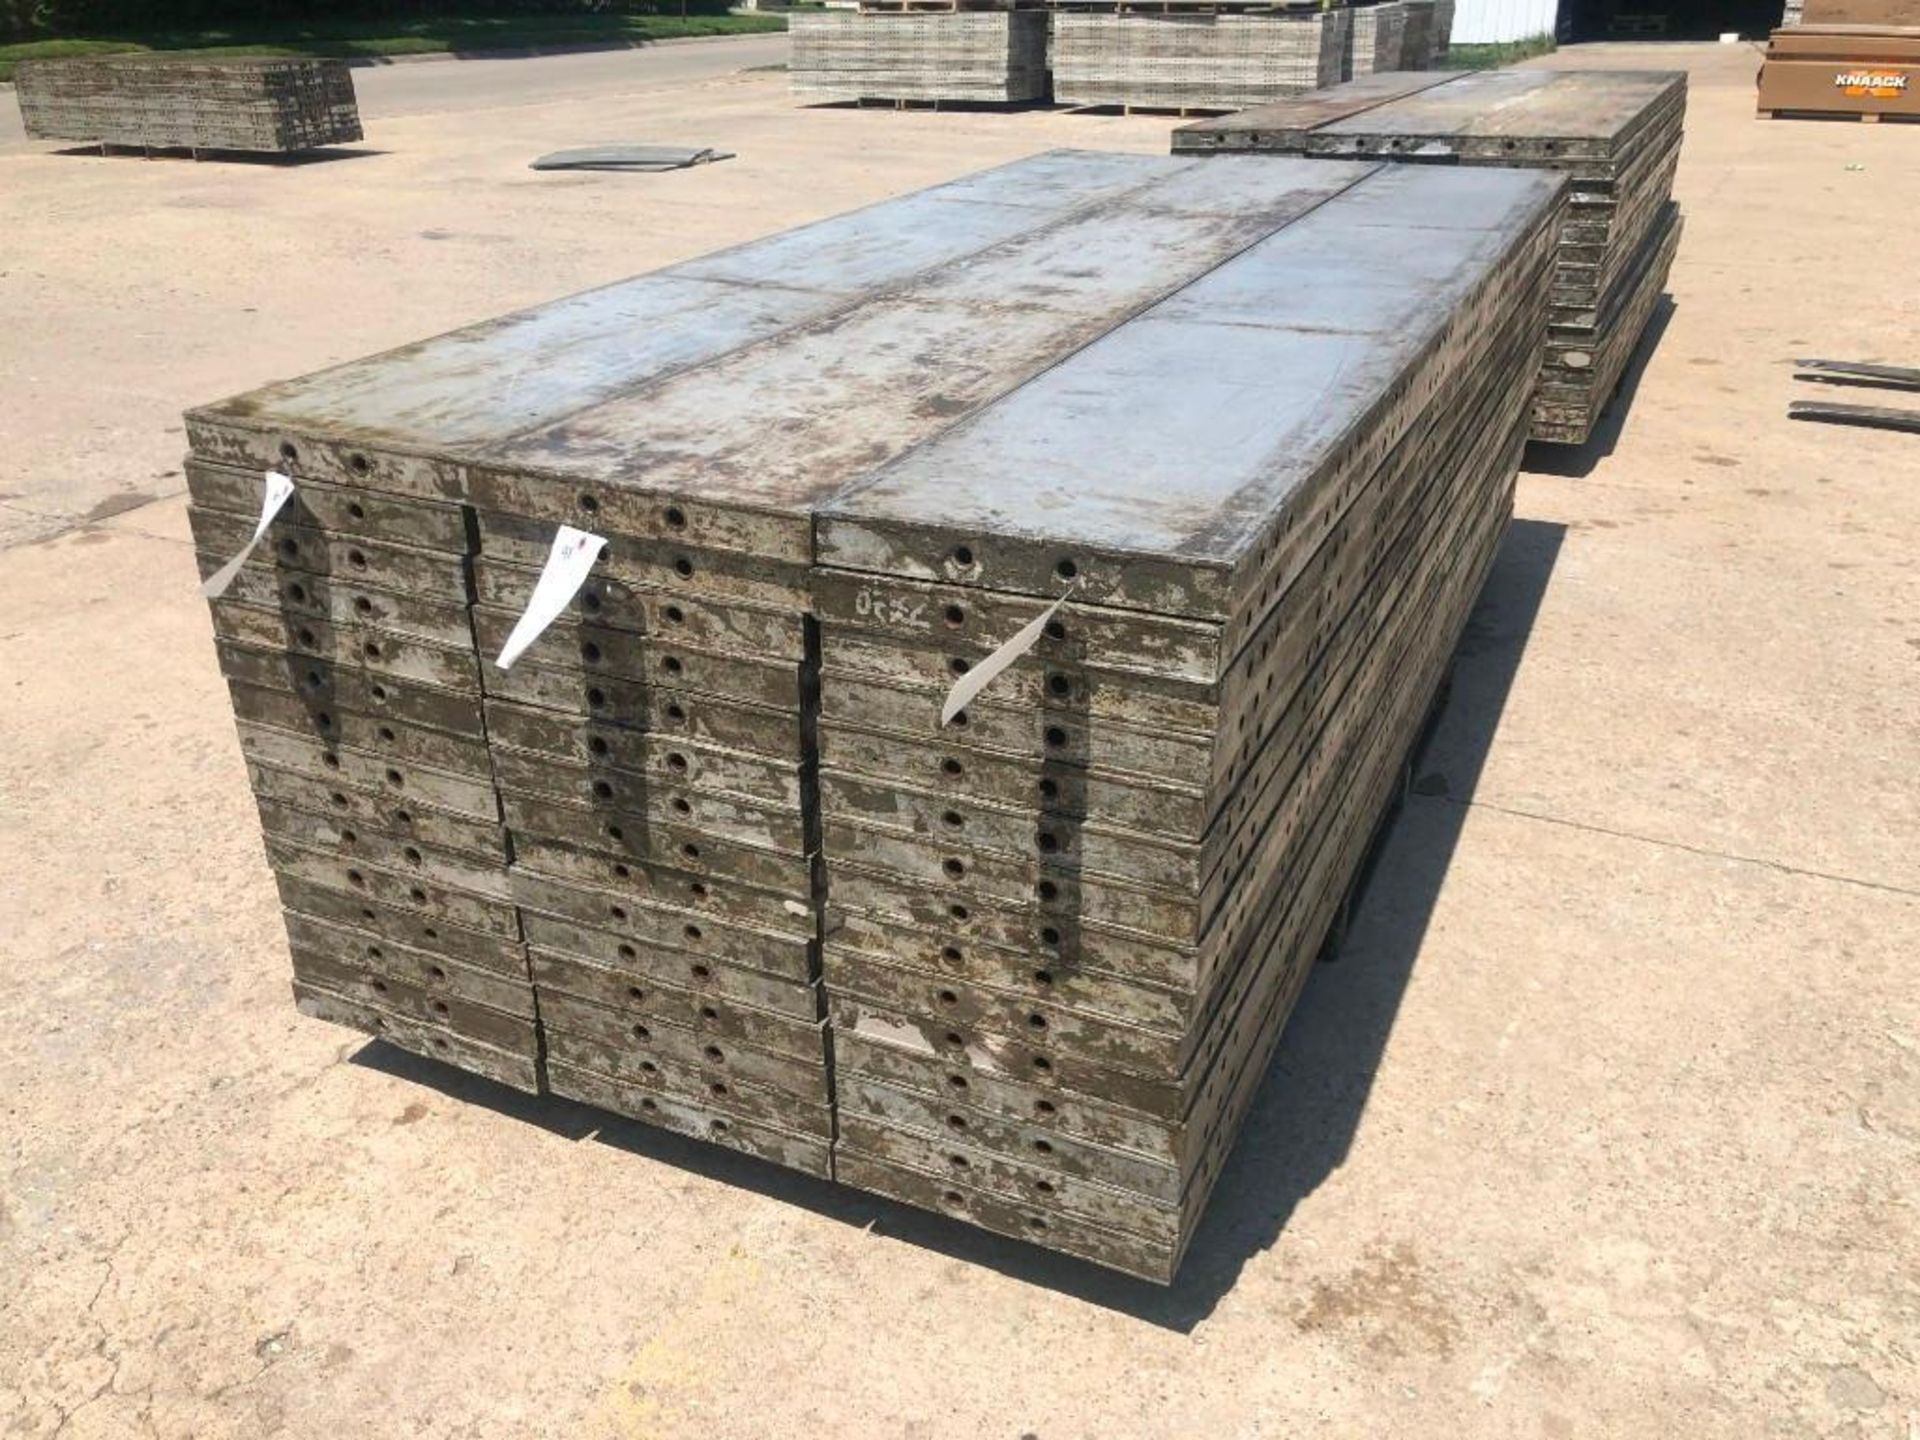 (15) 16" x 9' Wall-Ties Aluminum Concrete Forms, CAP, Smooth 6-12 Hole Pattern. Located at 301 E